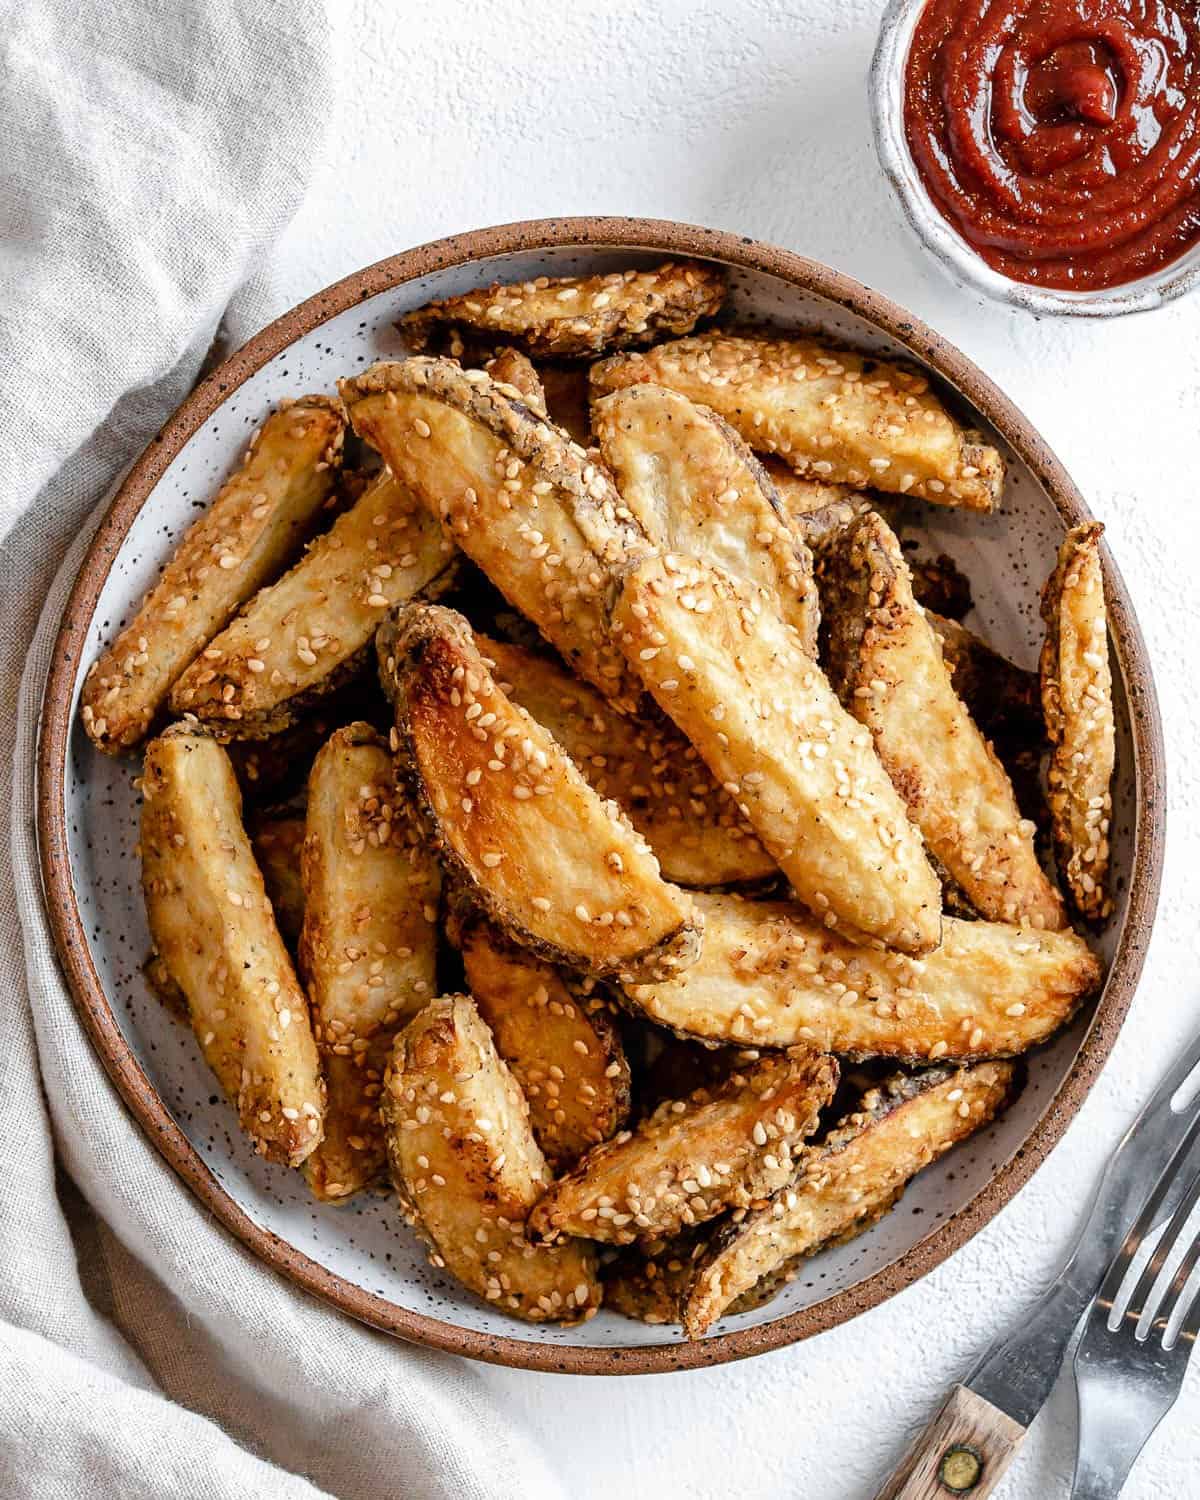 completed oven baked sesame fries on a white plate against a white background